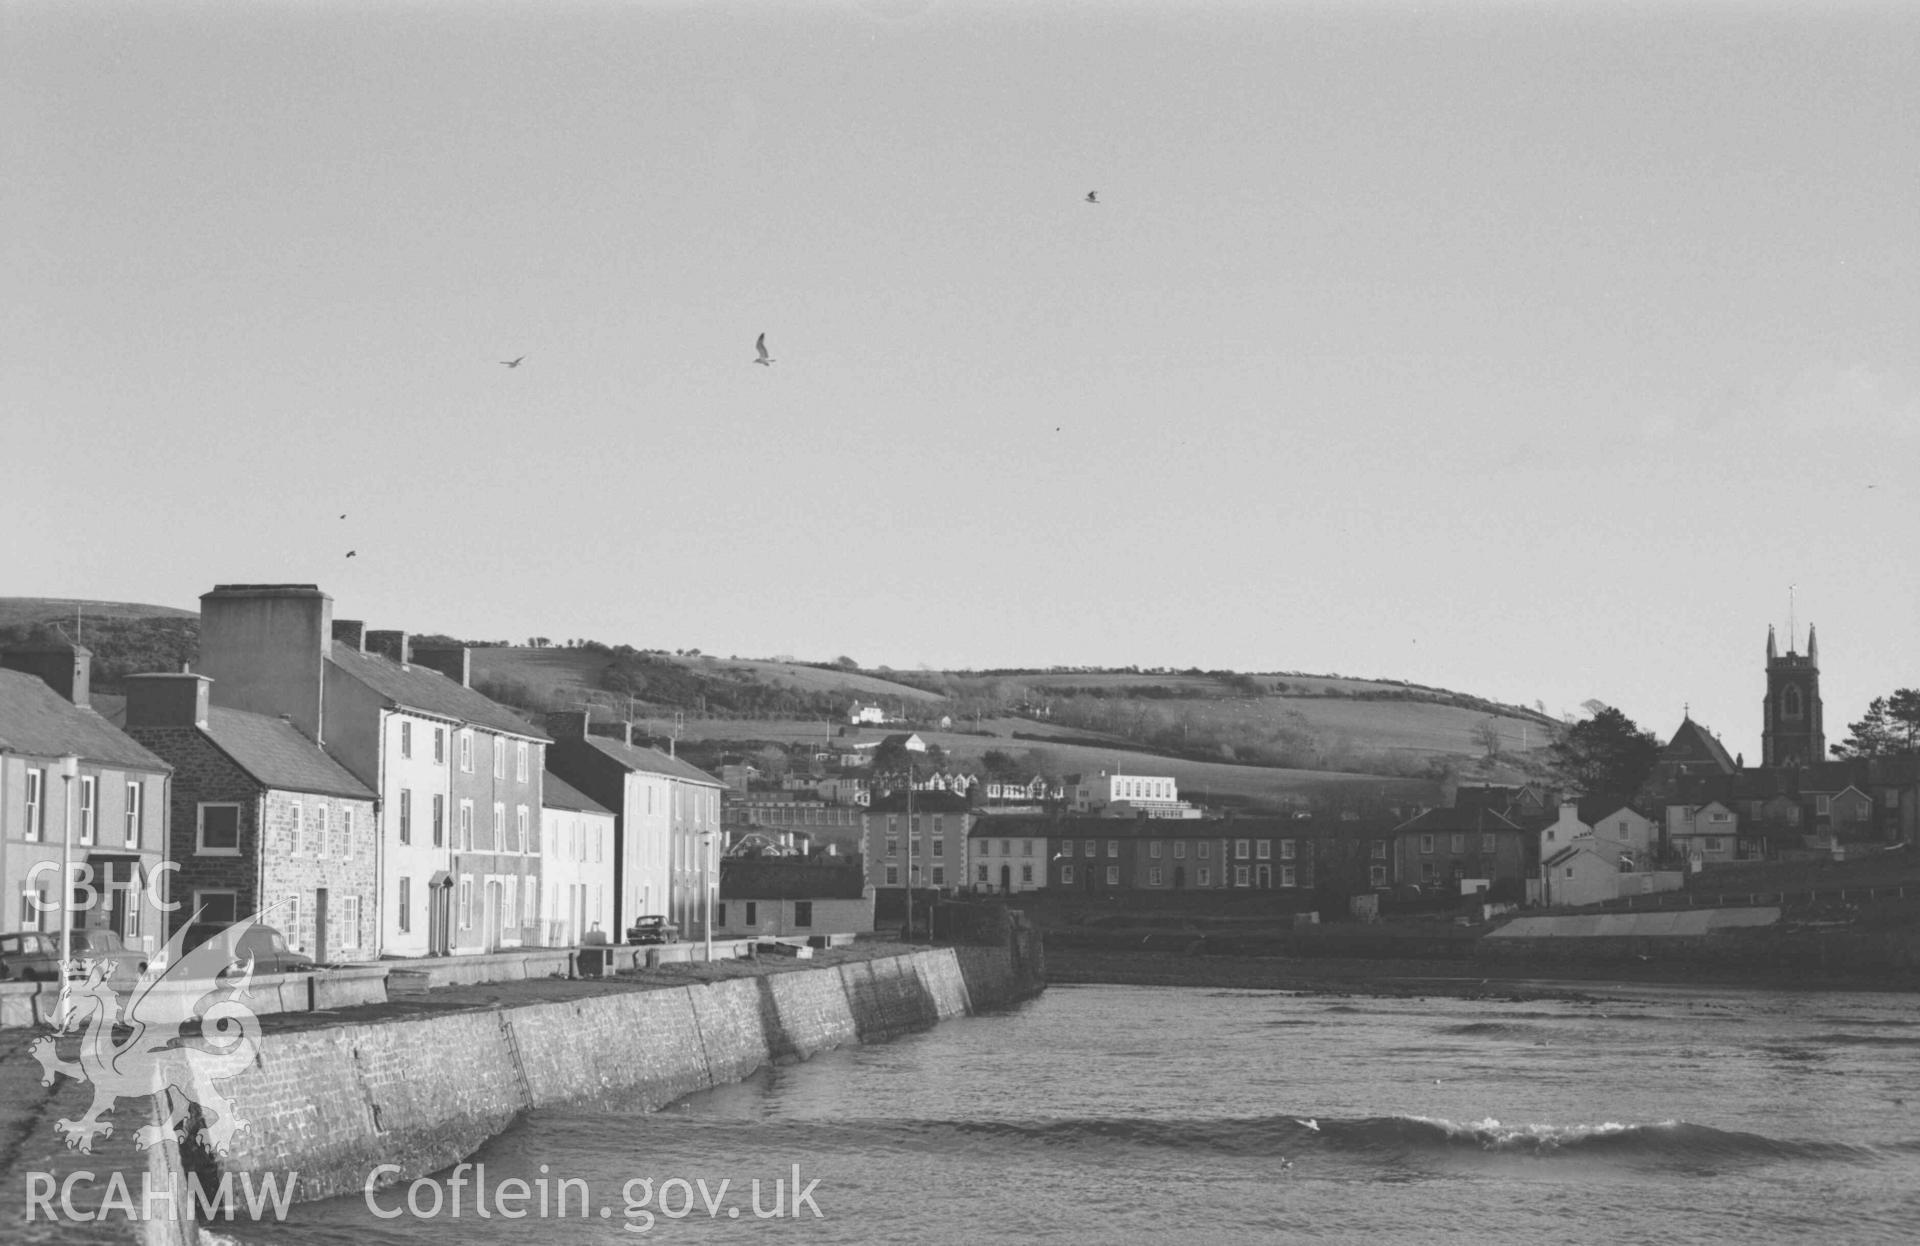 Digital copy of a black and white negative showing view up Aberaeron harbour from the pier. Photographed by Arthur Chater on 28 December 1968. Looking south east from Grid Reference SN 4553 6300.